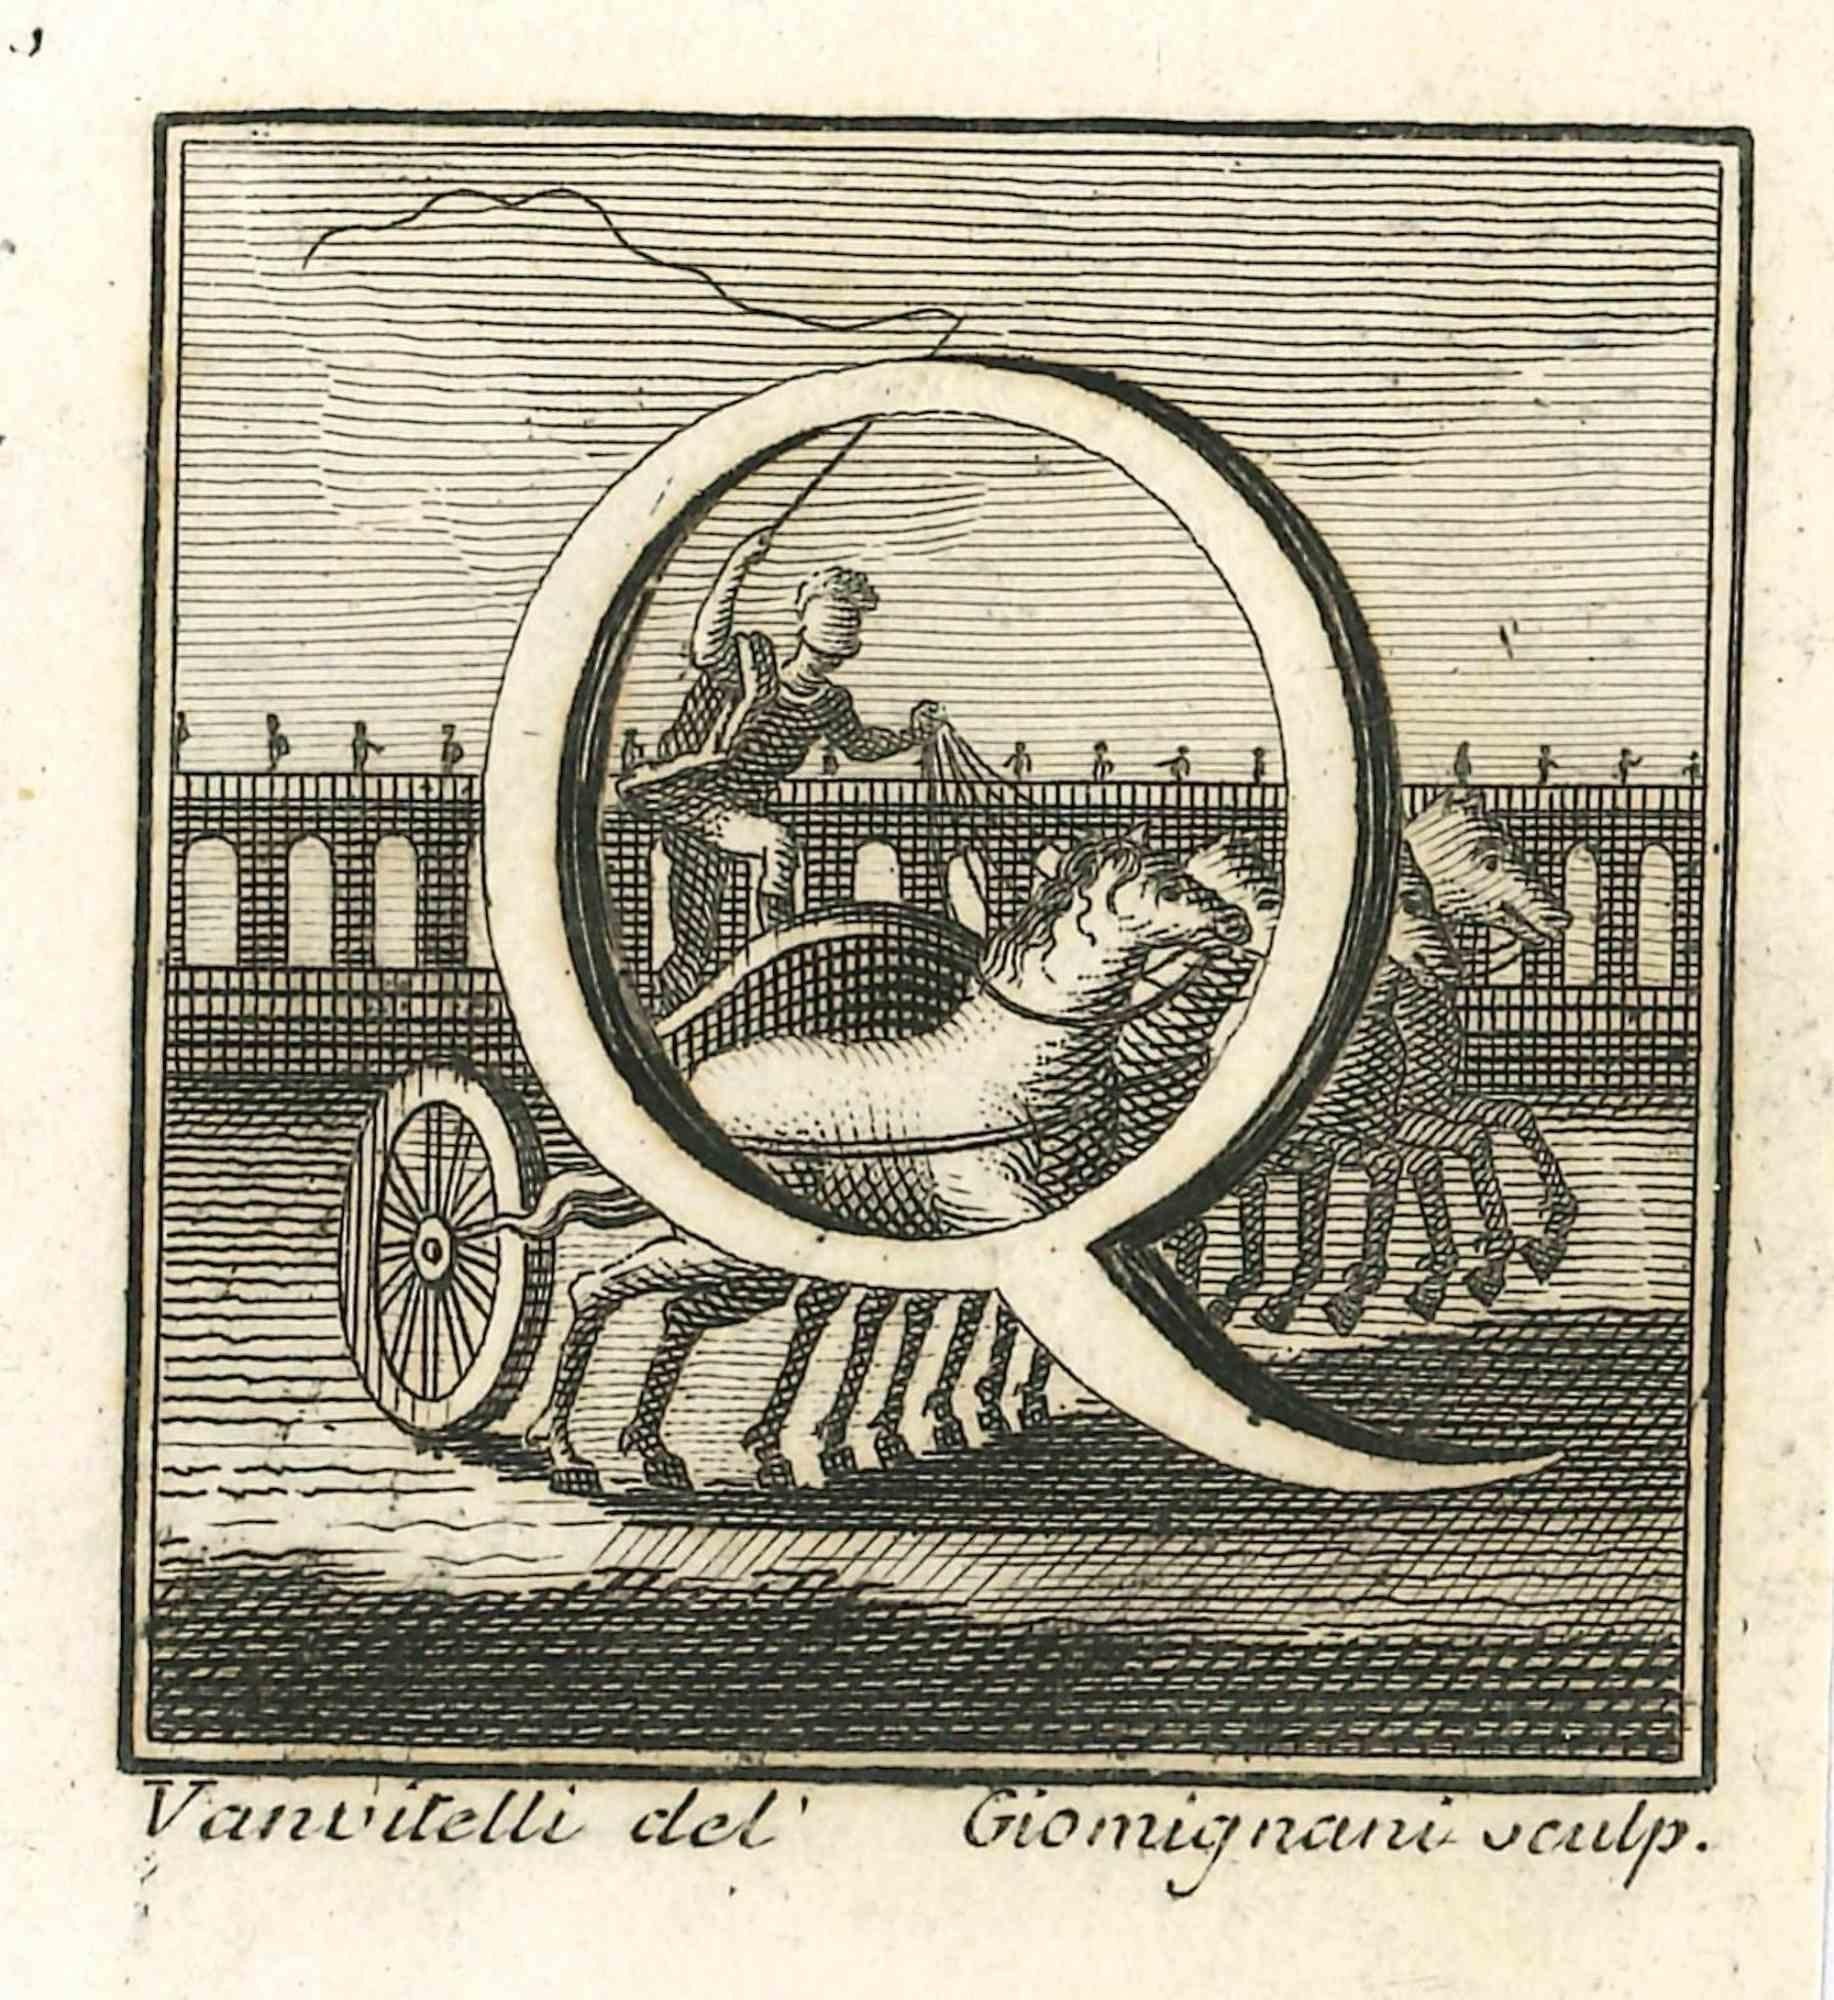 Letter of the Alphabet Q,  from the series "Antiquities of Herculaneum", is an etching on paper realized by Luigi Vanvitelli in the 18th century.

Good conditions.

The etching belongs to the print suite “Antiquities of Herculaneum Exposed”